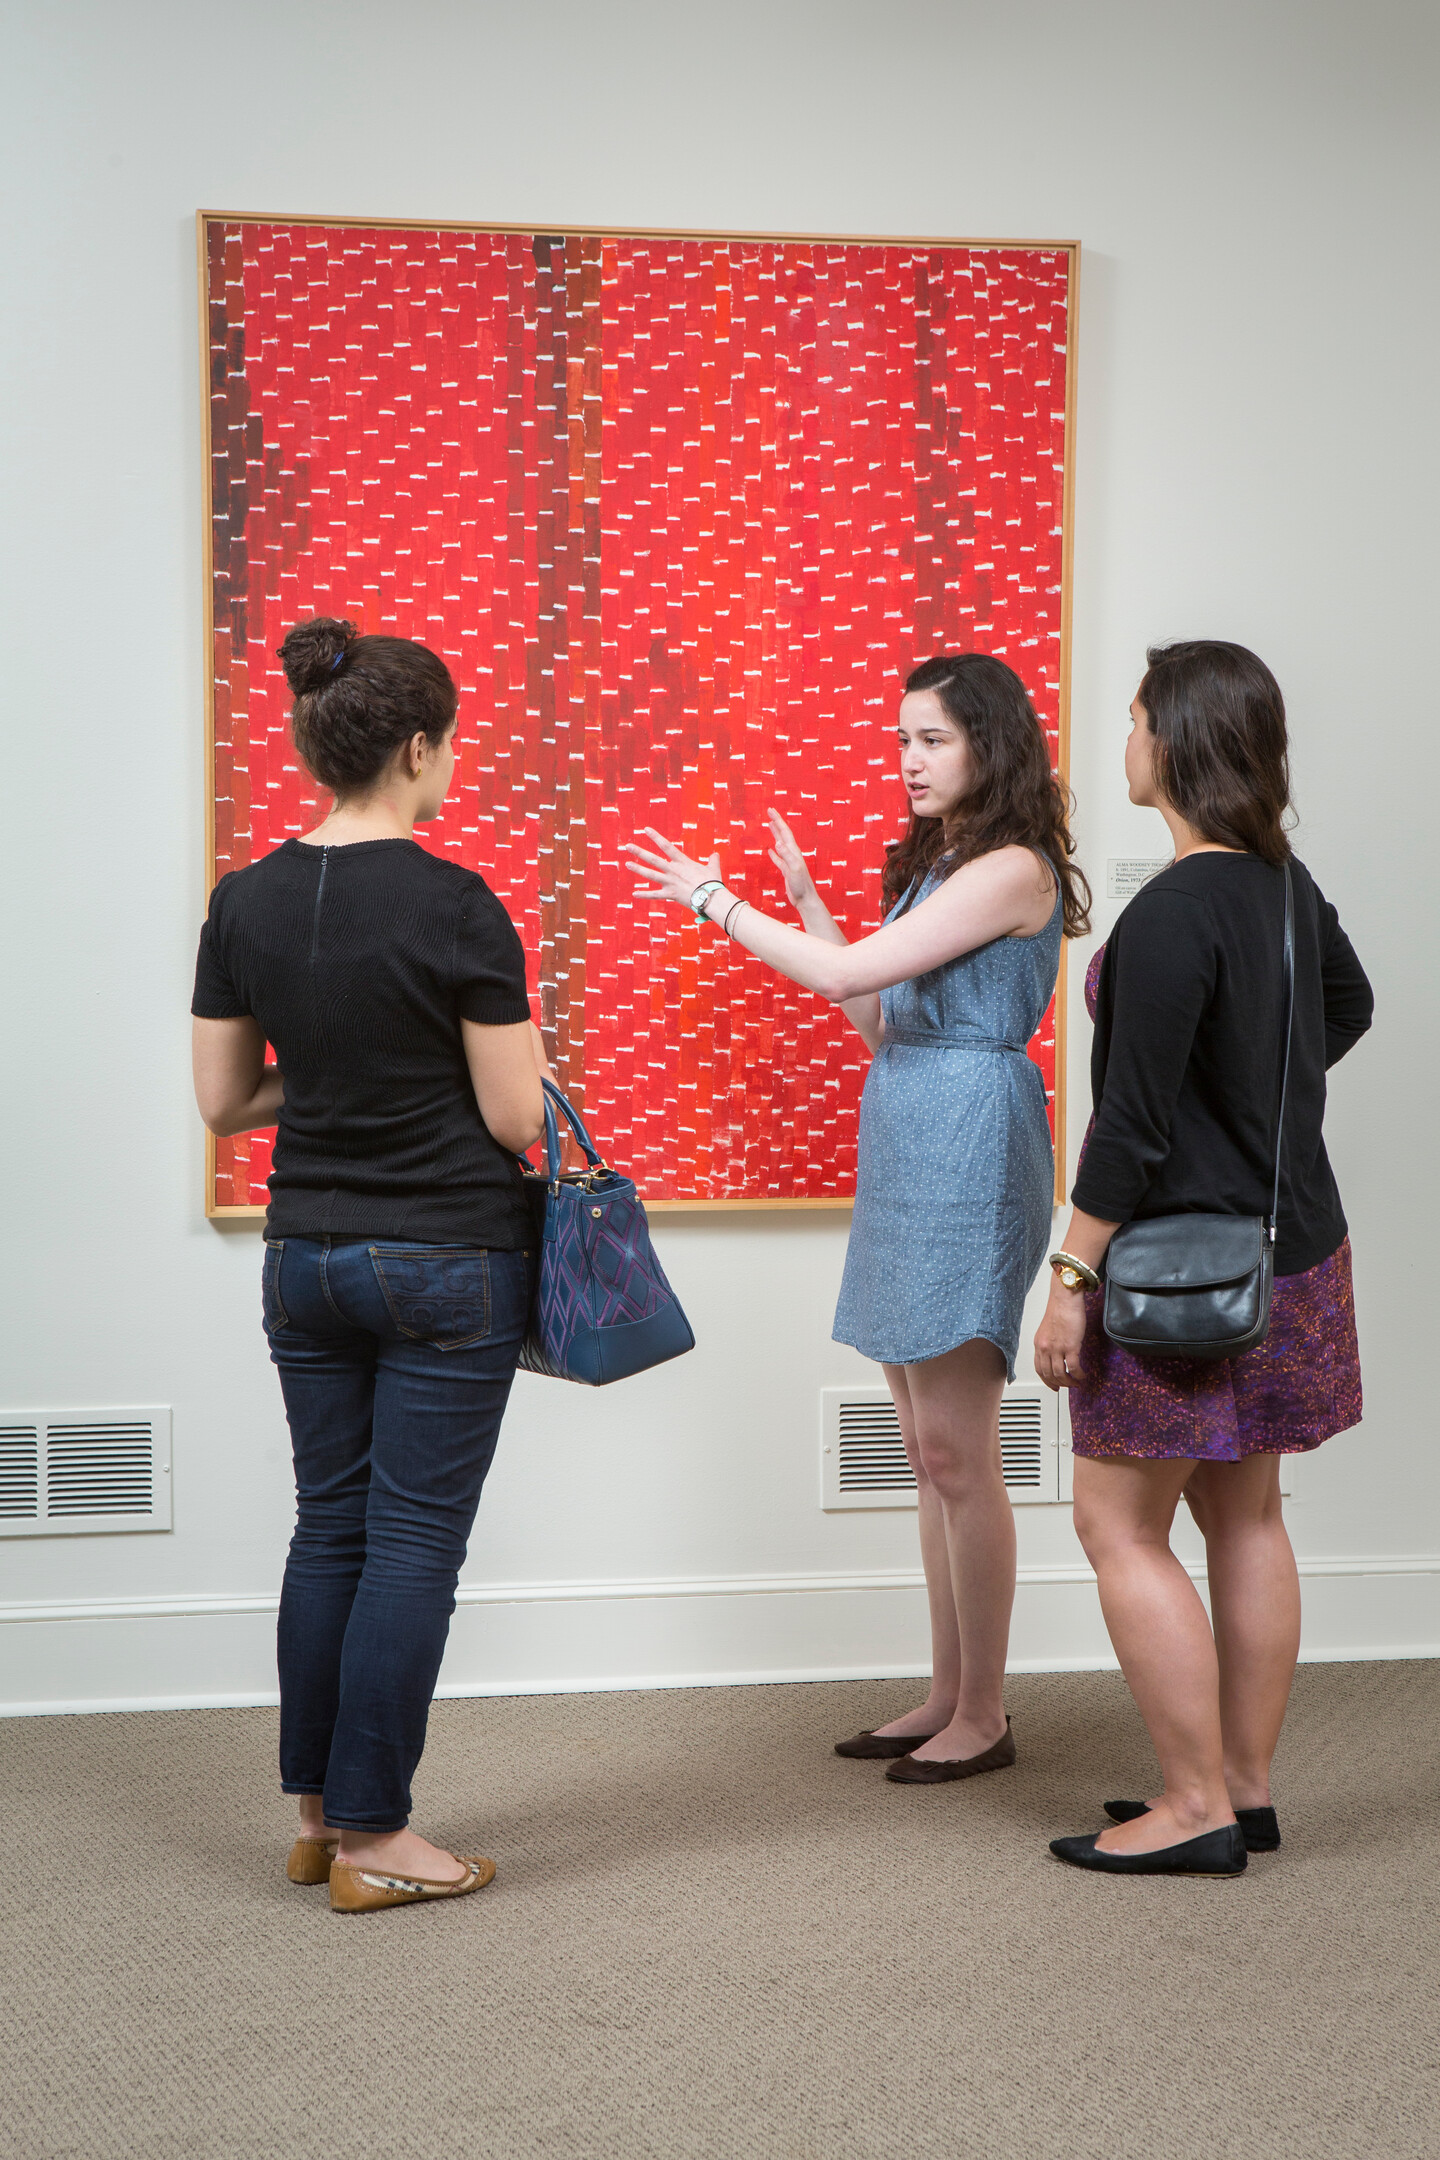 A woman with light skin tone and long dark hair in a denim summer dress talks about a large red and white abstract painting motioning with her arms outstretched. She is talking in front of two women who are looking at the painting in a museum gallery.